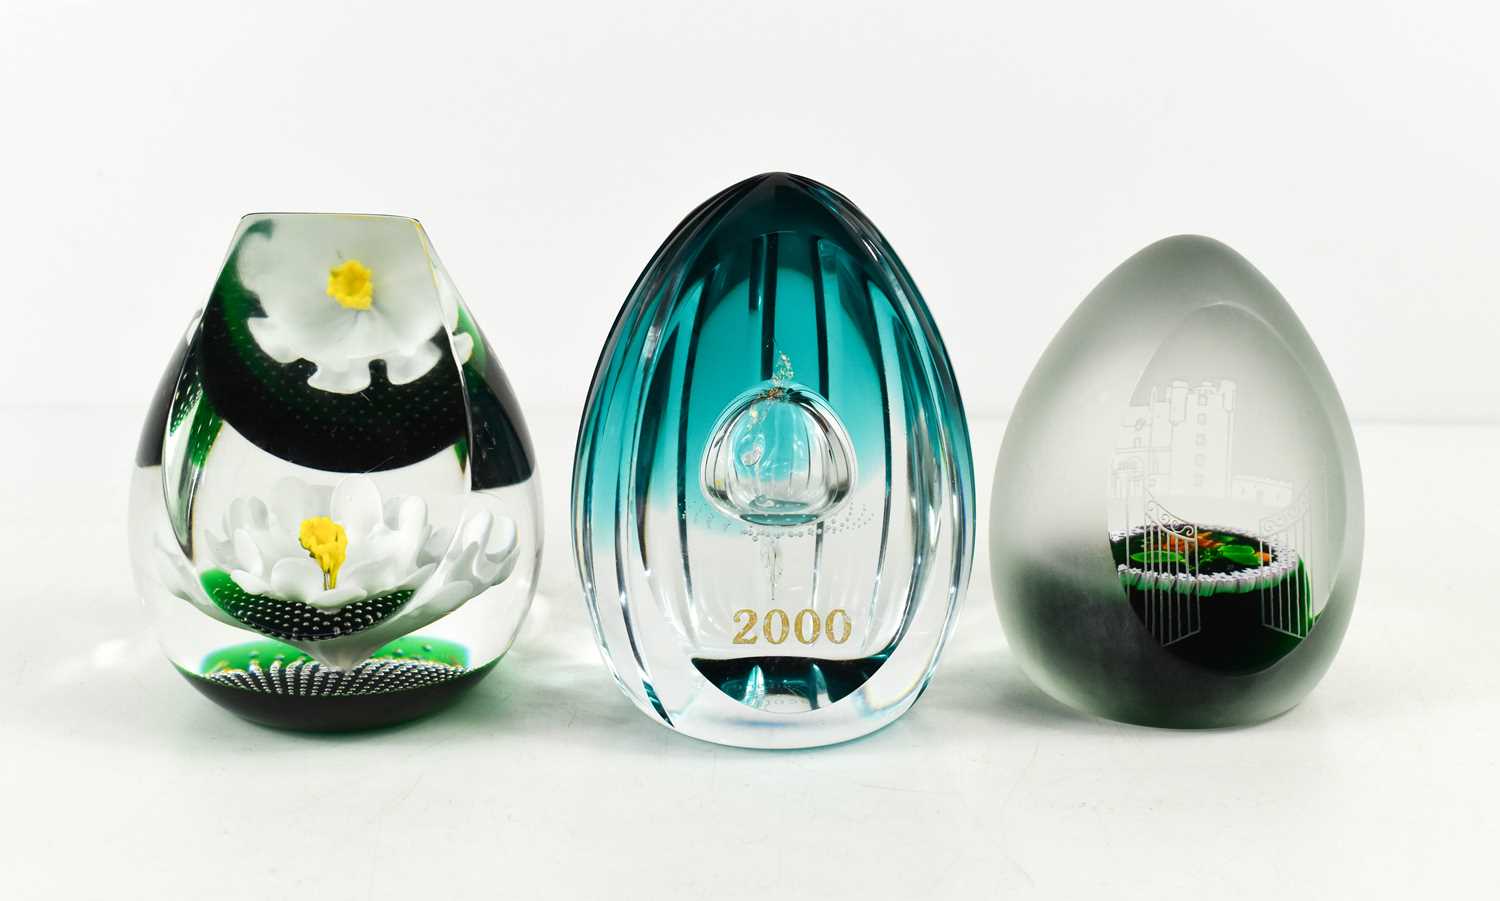 Three Caithness of Scotland glass paperweights: Daisy Daisy 257/350, Castle of Mey 19/100, and 2000,